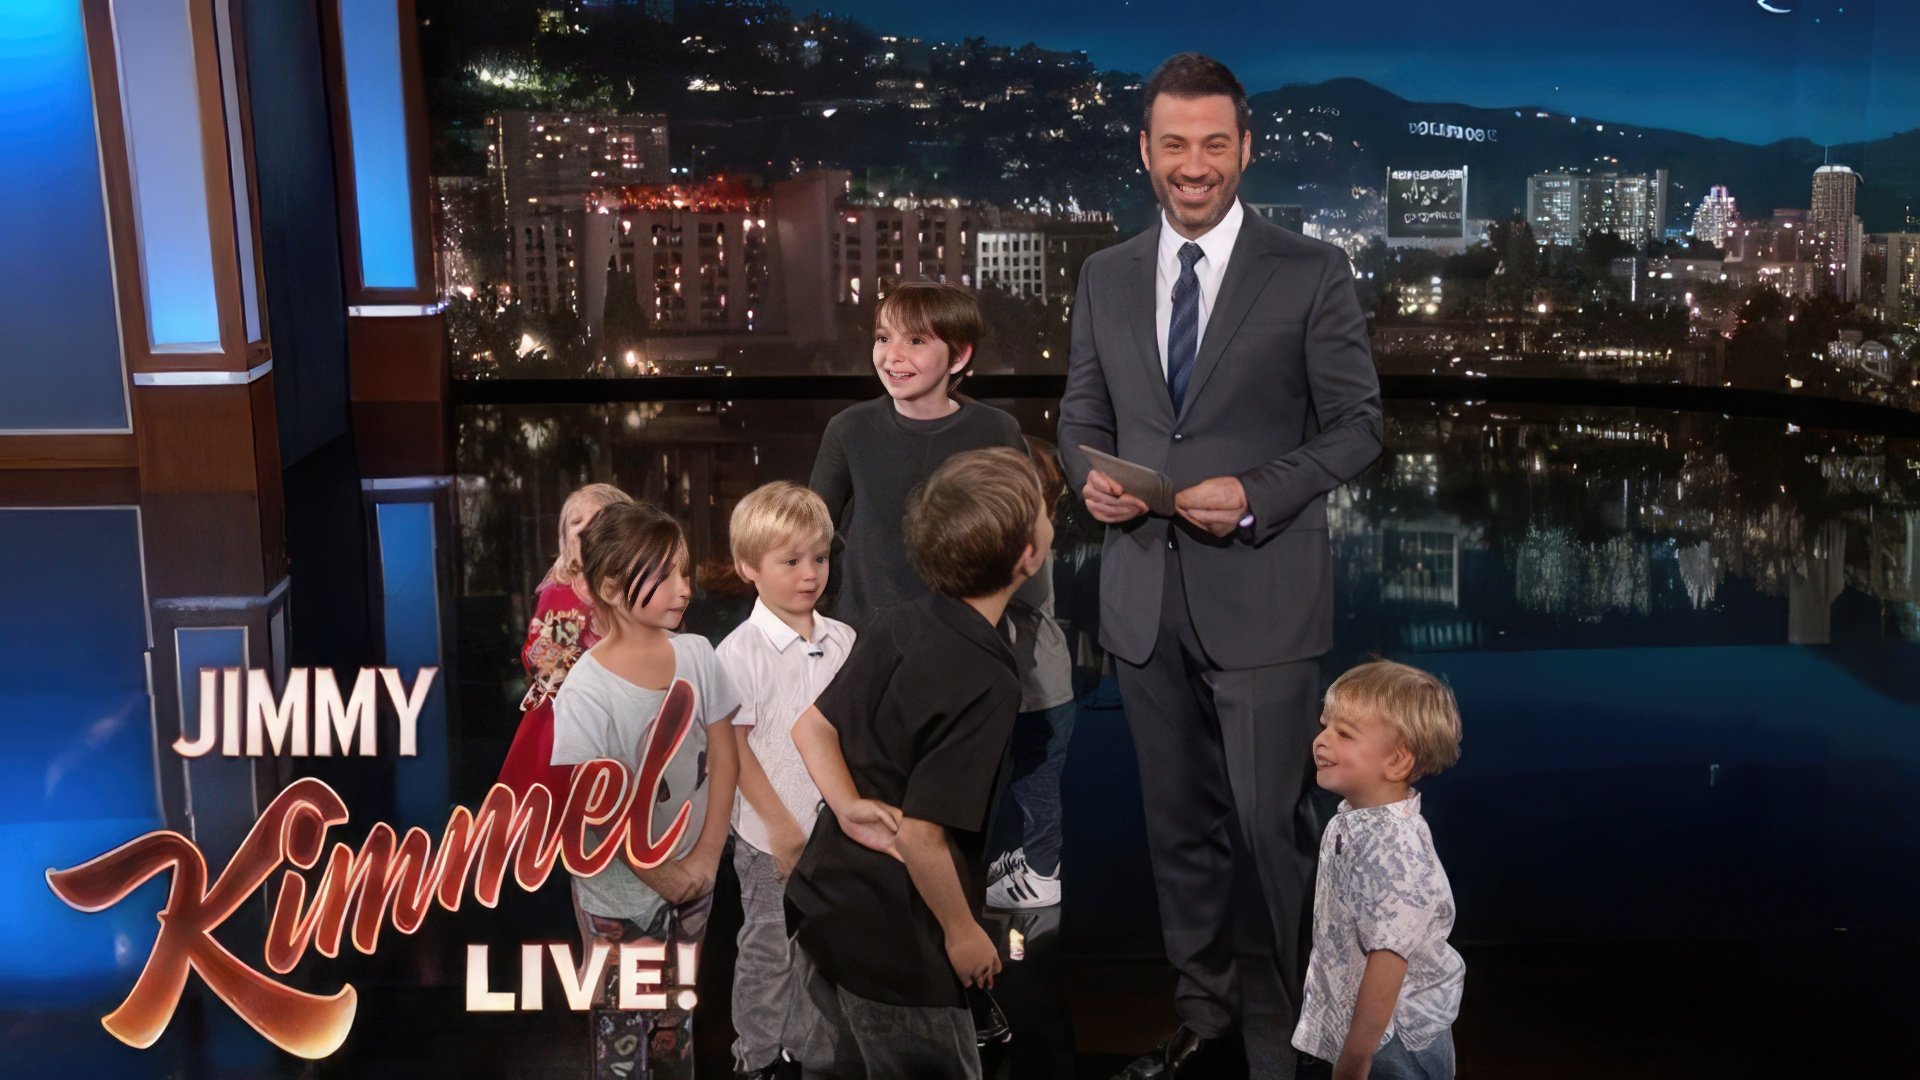 In 2013 Jimmy Kimmel started a new segment in Jimmy Kimmel Live! discussing the political questions with kids